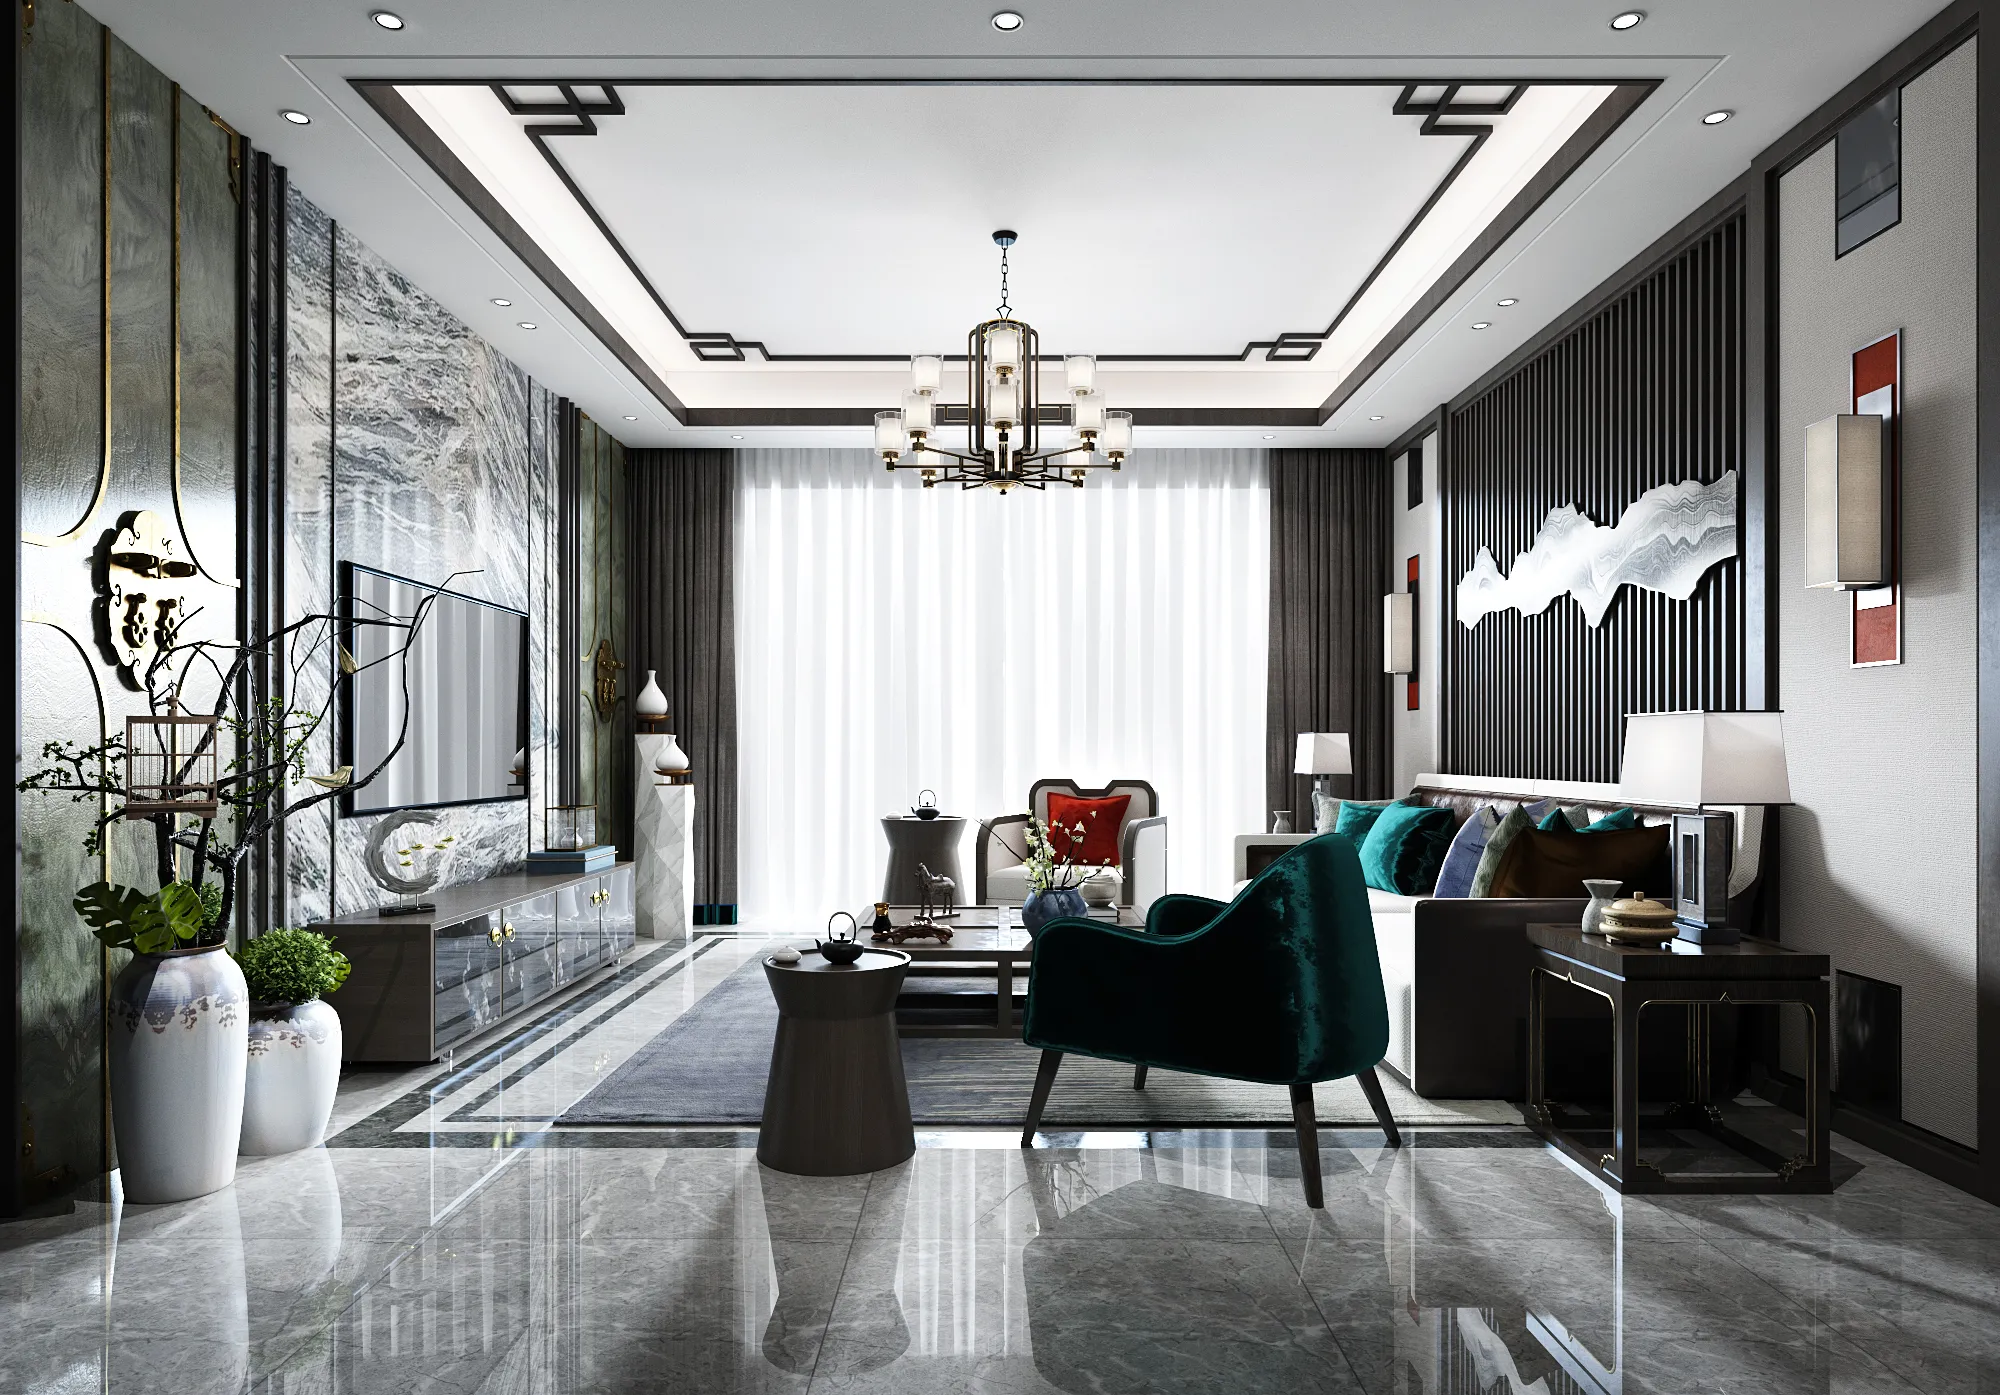 DESMOD INTERIOR 2021 (VRAY) – 4. LIVING ROOM – CHINESE – 094